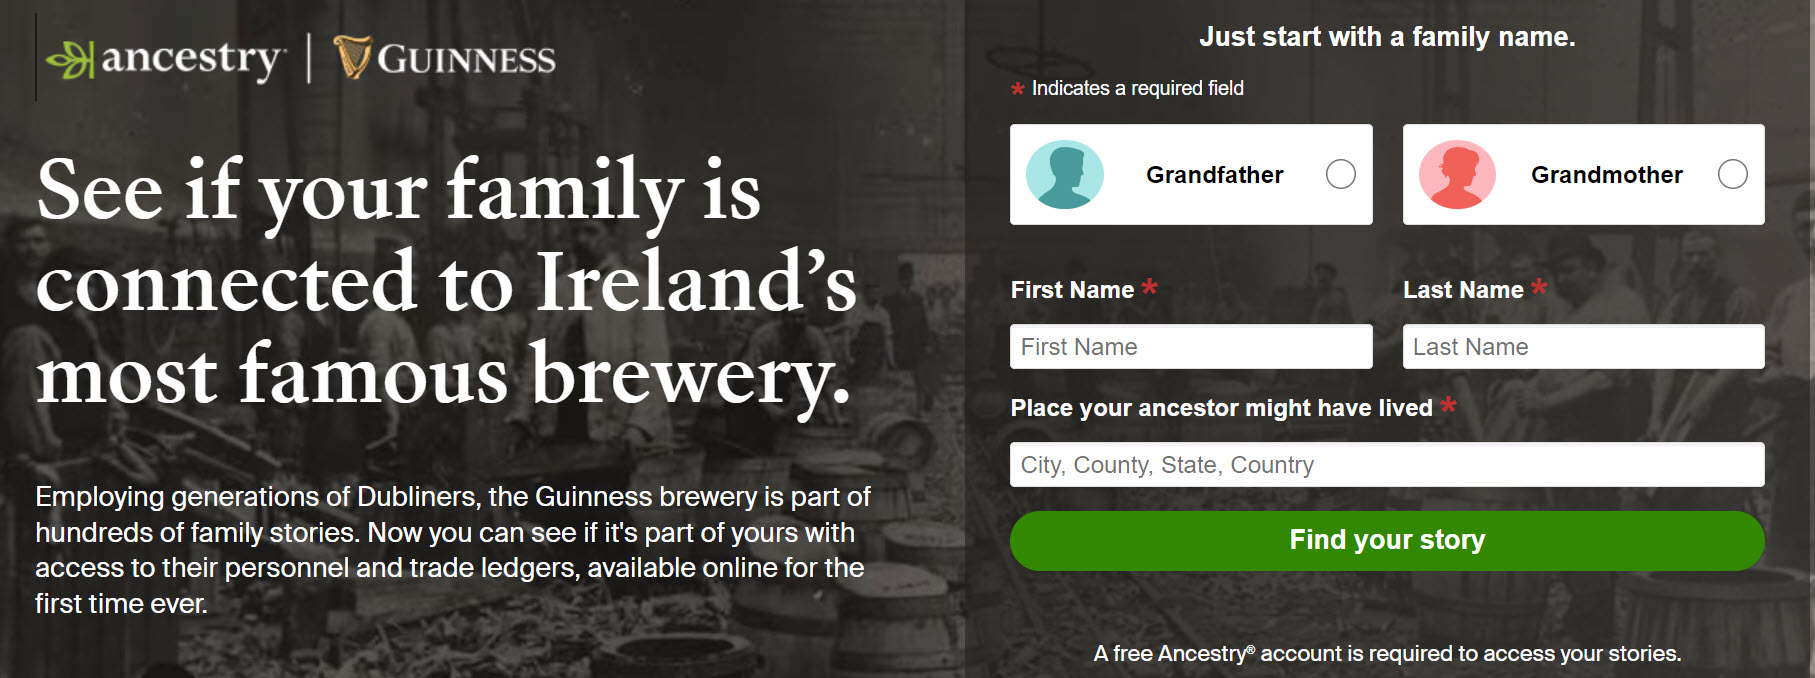 Searching for Irish Ancestry? FREE ACCESS to Irish Records at Ancestry